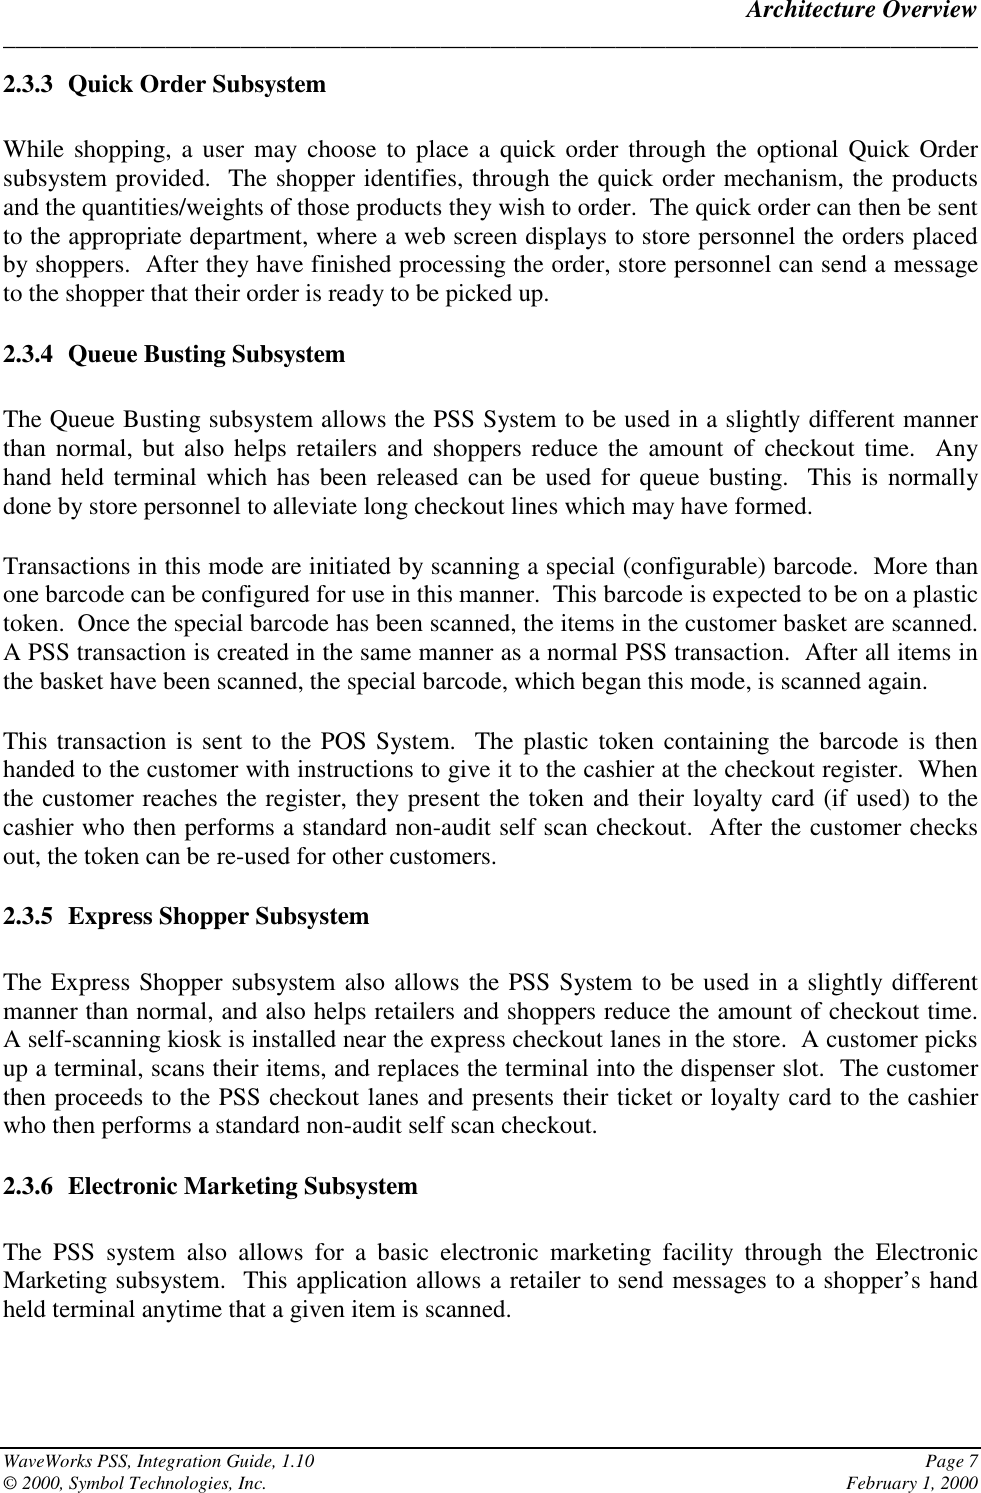 Architecture Overview______________________________________________________________________________WaveWorks PSS, Integration Guide, 1.10 Page 7© 2000, Symbol Technologies, Inc. February 1, 20002.3.3 Quick Order SubsystemWhile shopping, a user may choose to place a quick order through the optional Quick Ordersubsystem provided.  The shopper identifies, through the quick order mechanism, the productsand the quantities/weights of those products they wish to order.  The quick order can then be sentto the appropriate department, where a web screen displays to store personnel the orders placedby shoppers.  After they have finished processing the order, store personnel can send a messageto the shopper that their order is ready to be picked up.2.3.4 Queue Busting SubsystemThe Queue Busting subsystem allows the PSS System to be used in a slightly different mannerthan normal, but also helps retailers and shoppers reduce the amount of checkout time.  Anyhand held terminal which has been released can be used for queue busting.  This is normallydone by store personnel to alleviate long checkout lines which may have formed.Transactions in this mode are initiated by scanning a special (configurable) barcode.  More thanone barcode can be configured for use in this manner.  This barcode is expected to be on a plastictoken.  Once the special barcode has been scanned, the items in the customer basket are scanned.A PSS transaction is created in the same manner as a normal PSS transaction.  After all items inthe basket have been scanned, the special barcode, which began this mode, is scanned again.This transaction is sent to the POS System.  The plastic token containing the barcode is thenhanded to the customer with instructions to give it to the cashier at the checkout register.  Whenthe customer reaches the register, they present the token and their loyalty card (if used) to thecashier who then performs a standard non-audit self scan checkout.  After the customer checksout, the token can be re-used for other customers.2.3.5 Express Shopper SubsystemThe Express Shopper subsystem also allows the PSS System to be used in a slightly differentmanner than normal, and also helps retailers and shoppers reduce the amount of checkout time.A self-scanning kiosk is installed near the express checkout lanes in the store.  A customer picksup a terminal, scans their items, and replaces the terminal into the dispenser slot.  The customerthen proceeds to the PSS checkout lanes and presents their ticket or loyalty card to the cashierwho then performs a standard non-audit self scan checkout.2.3.6 Electronic Marketing SubsystemThe PSS system also allows for a basic electronic marketing facility through the ElectronicMarketing subsystem.  This application allows a retailer to send messages to a shopper’s handheld terminal anytime that a given item is scanned.